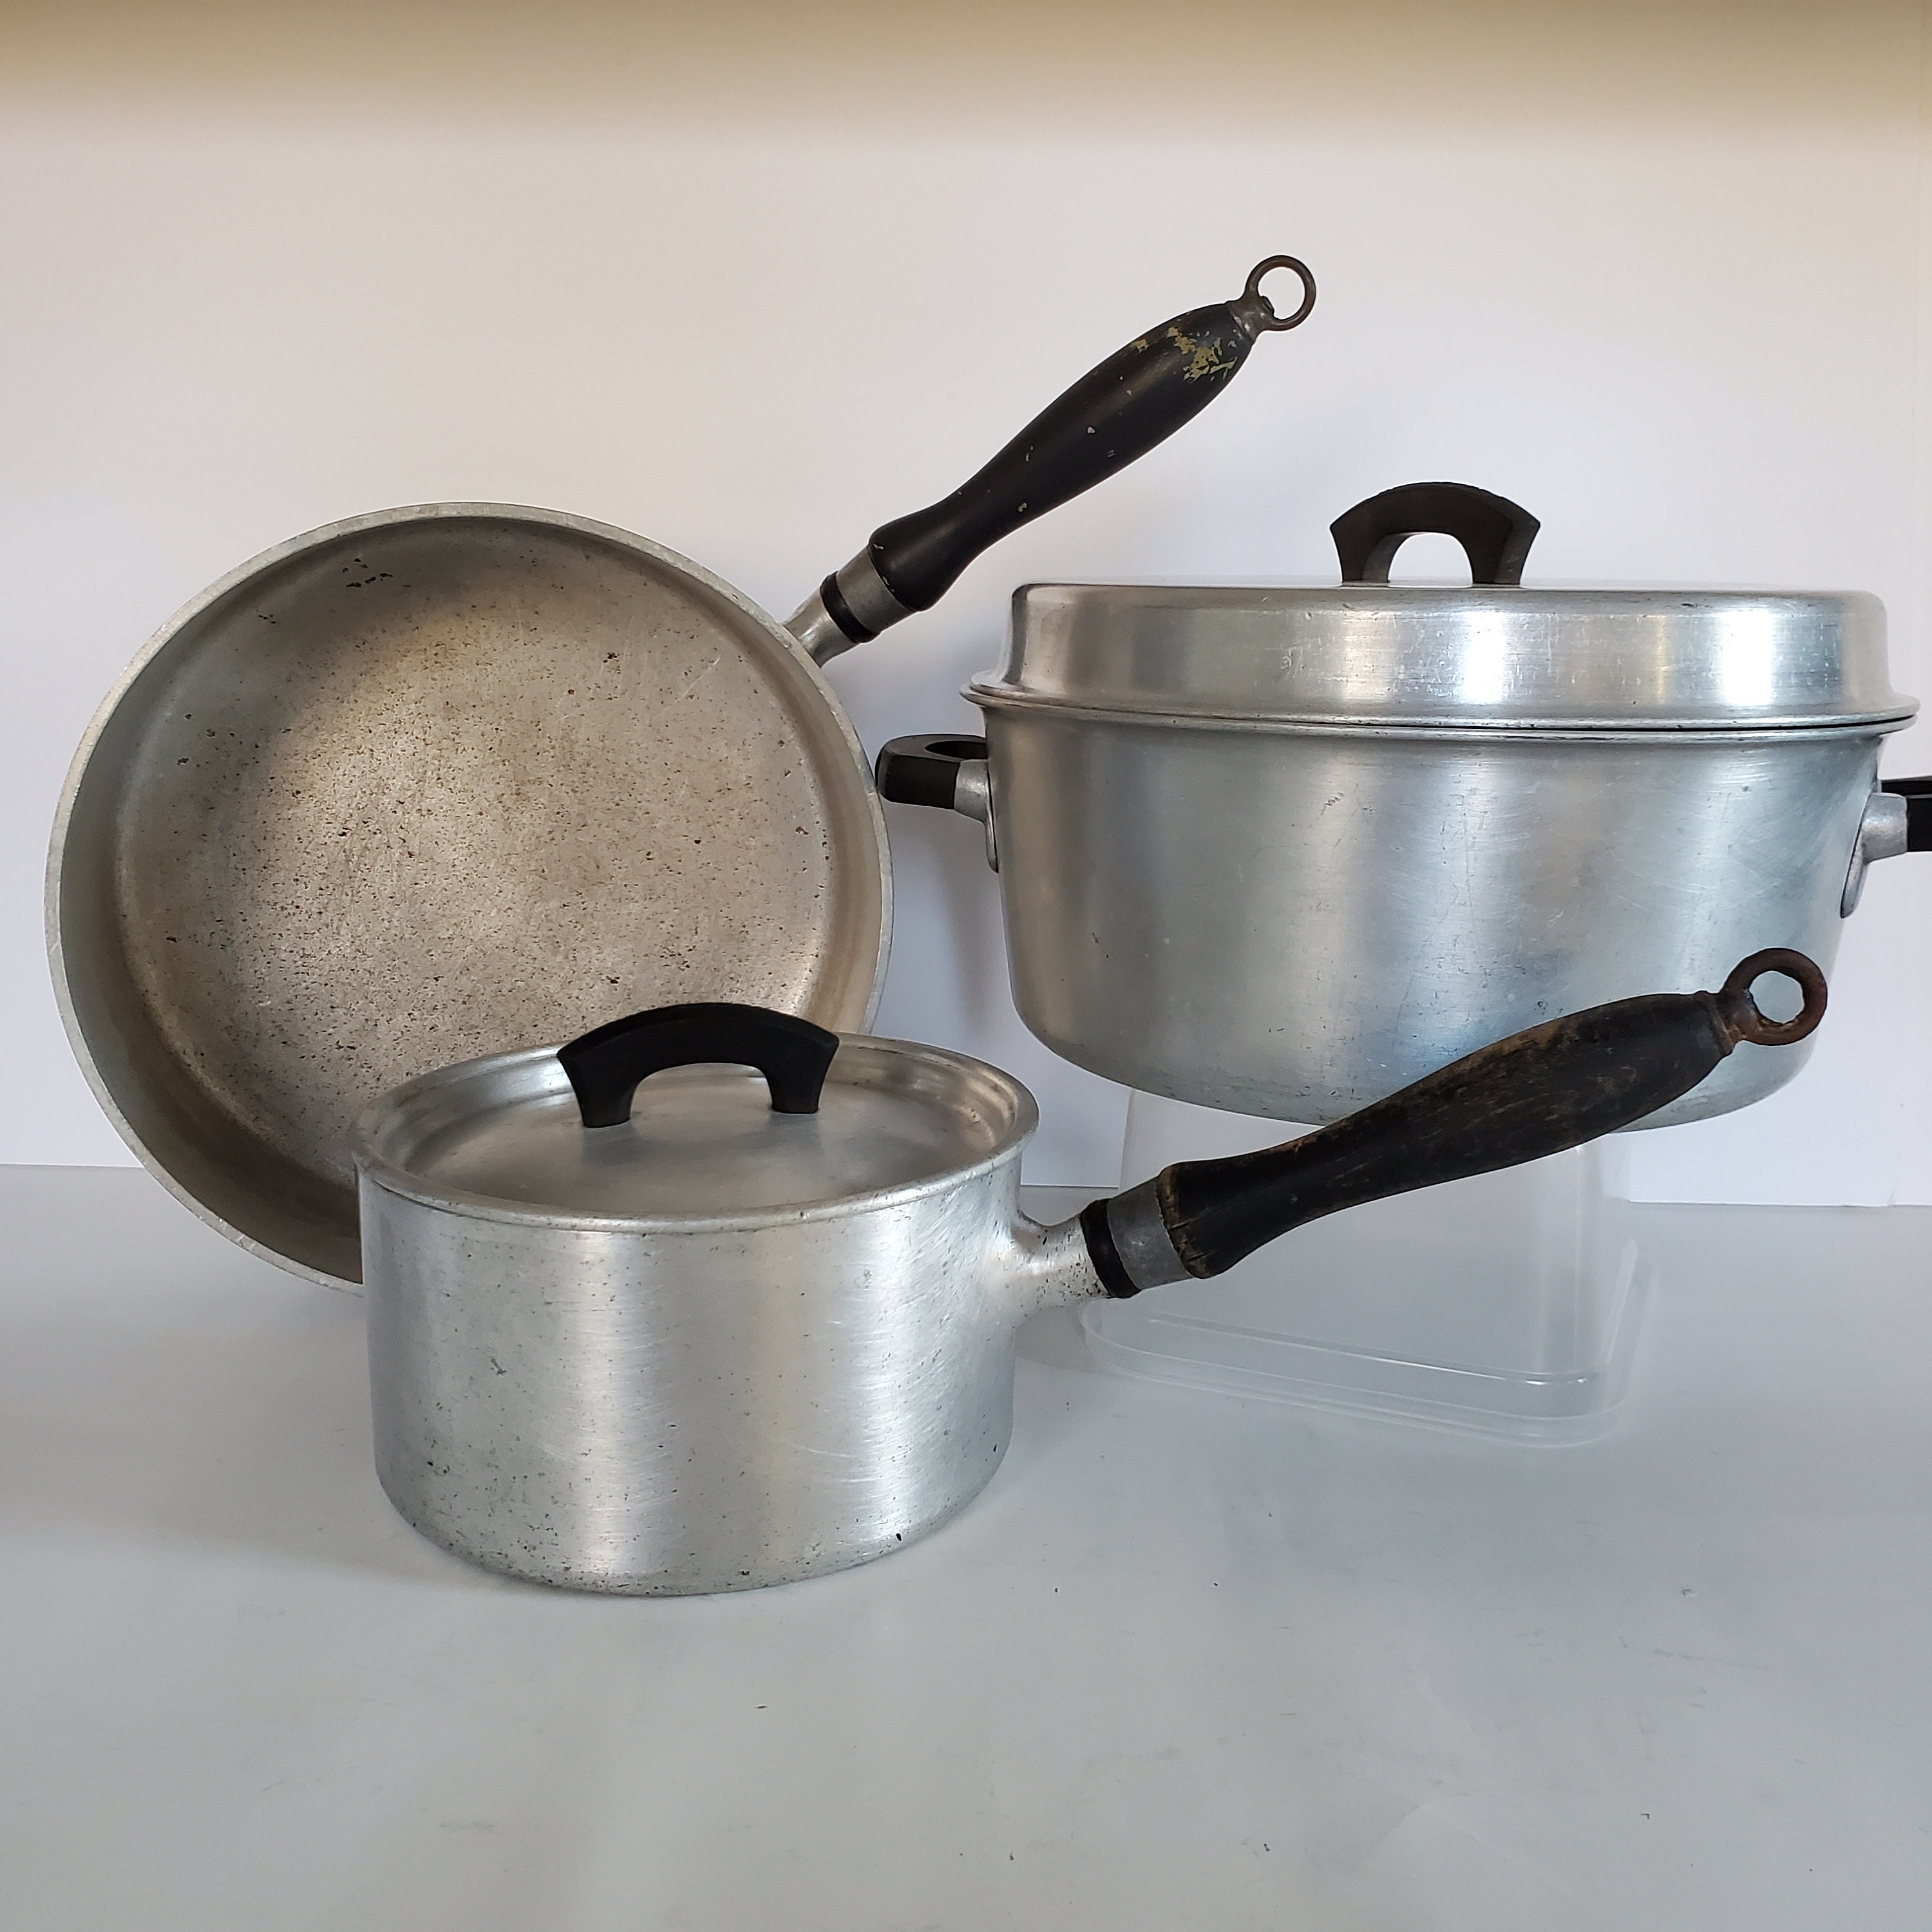 OAPE Stewpan Large Cooking Pots Utensils Non-Stick Cookware